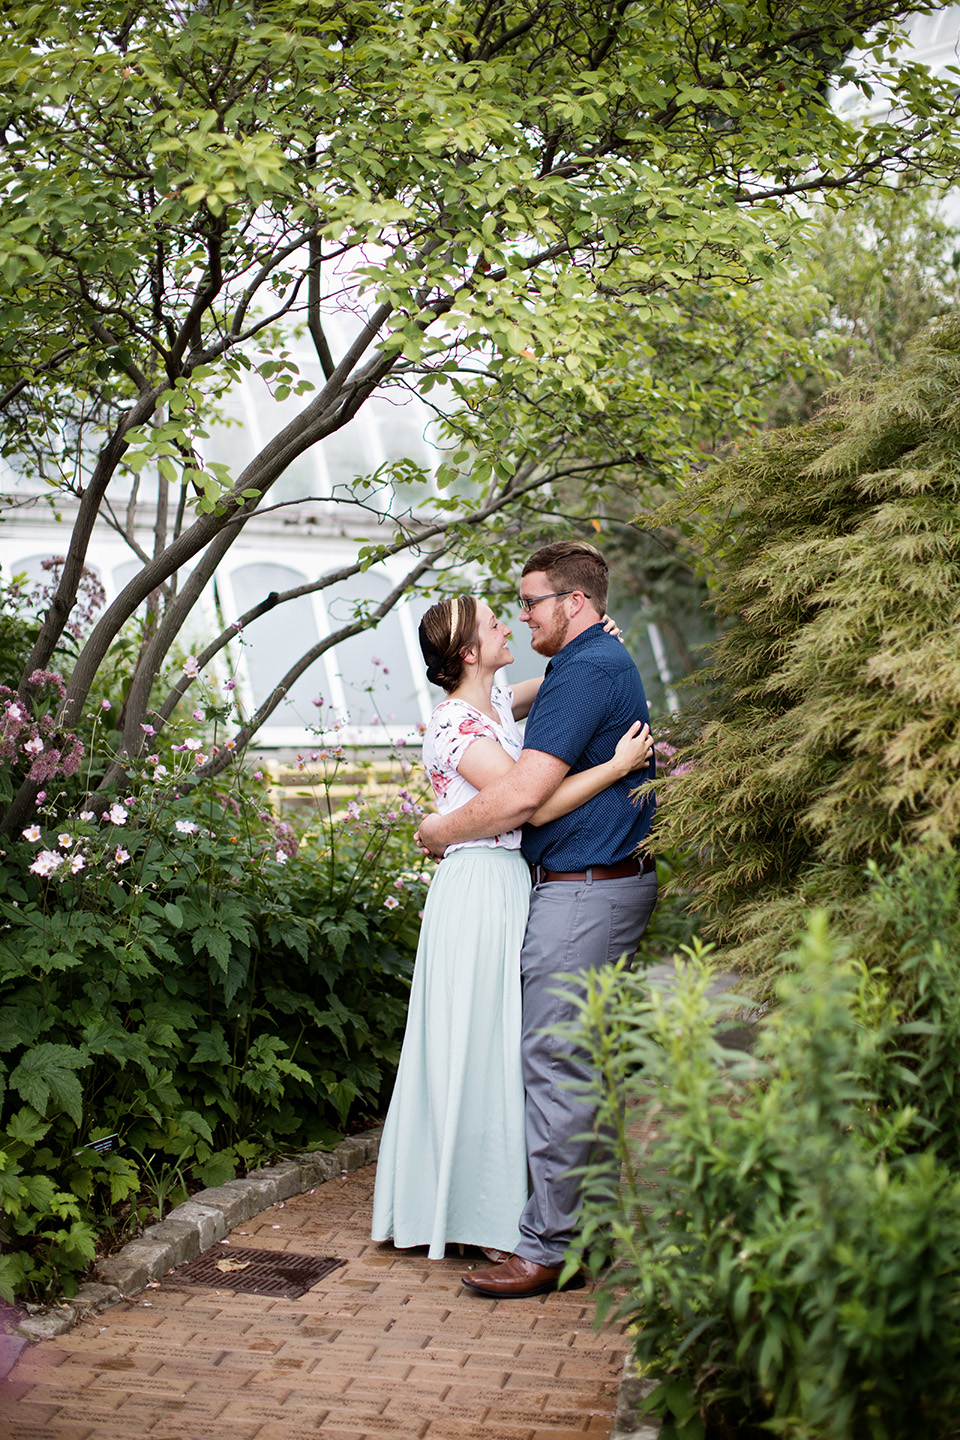 PHIPPS CONSERVATORY ENGAGEMENT PHOTO SESSION-PITTSBURGH, PA-LORENE+DUANE- 02